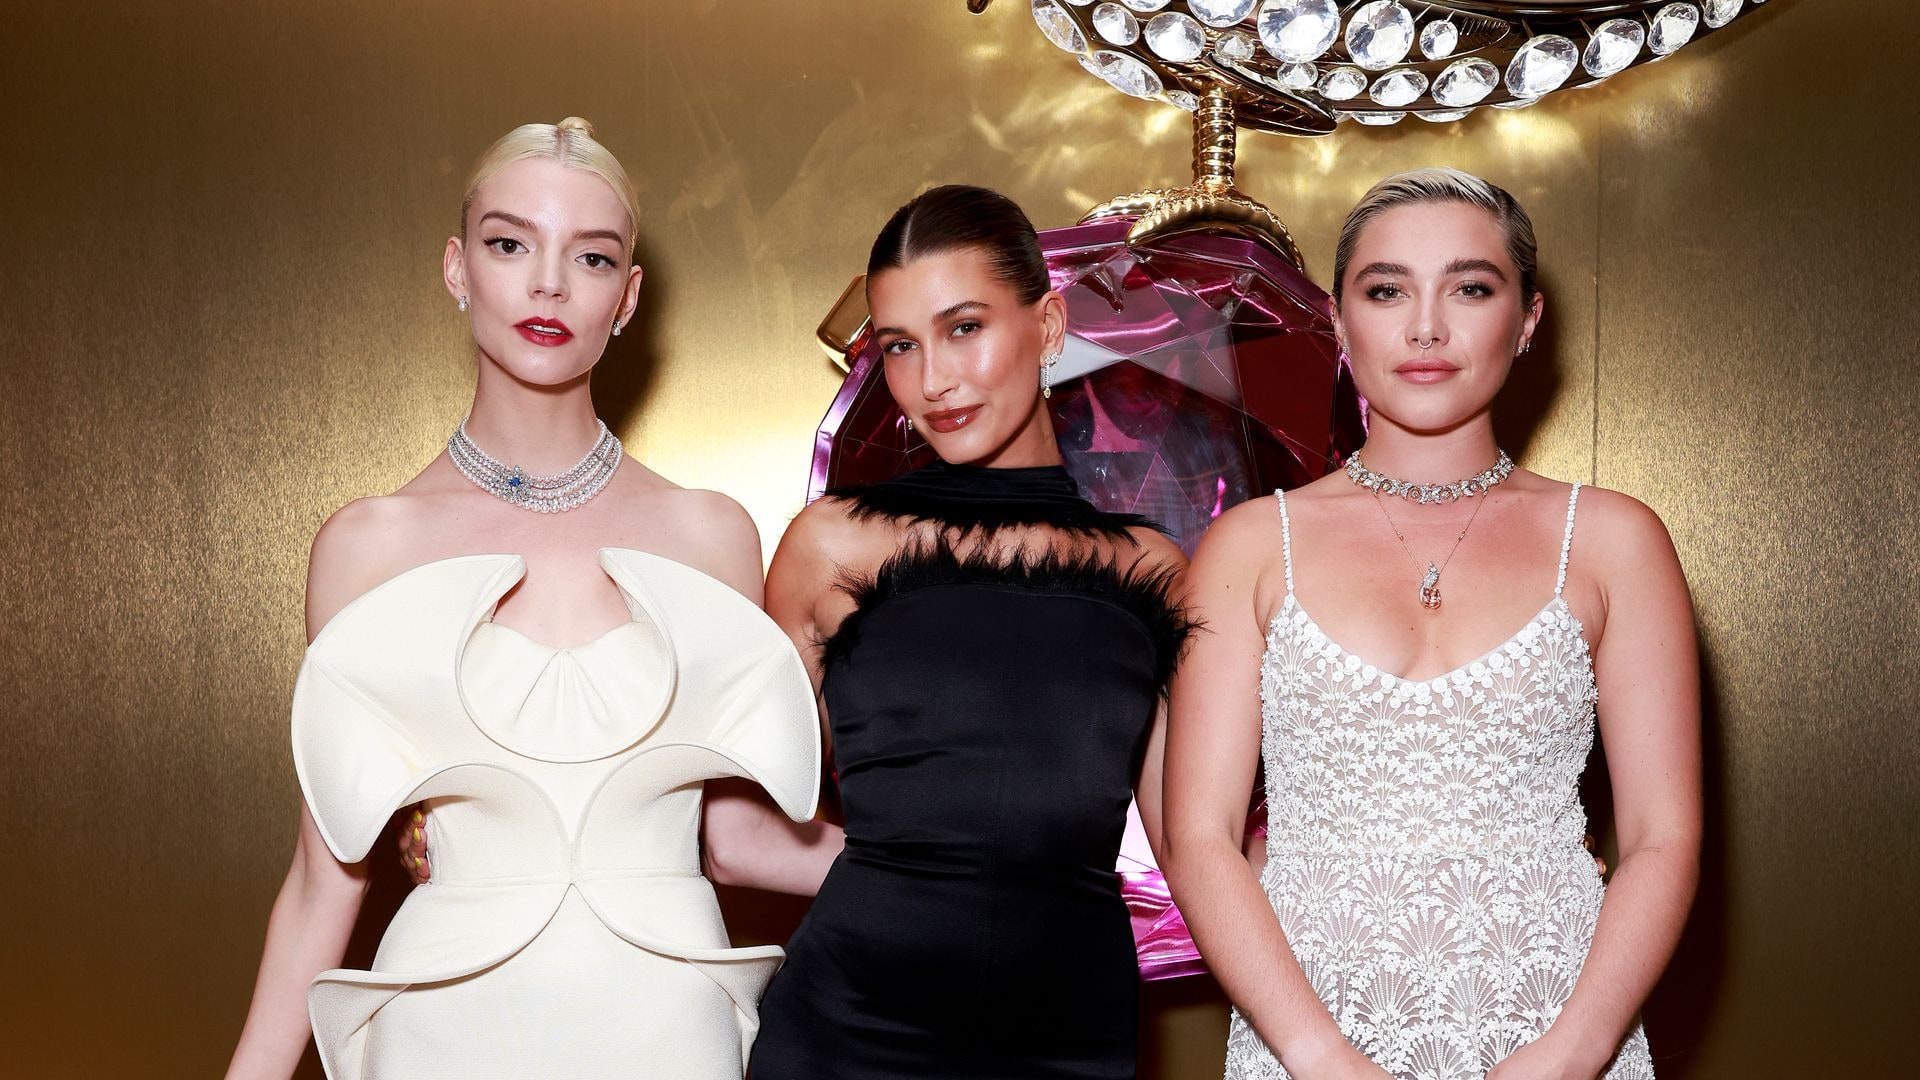 TOKYO, JAPAN - SEPTEMBER 12: (L-R) Anya Taylor-Joy, Hailey Bieber and Florence Pugh attend the opening event of Tiffany & Co.'s new store in Omotesando on September 12, 2023 in Tokyo, Japan. (Photo by Hanna Lassen/Getty Images for Tiffany & Co.)